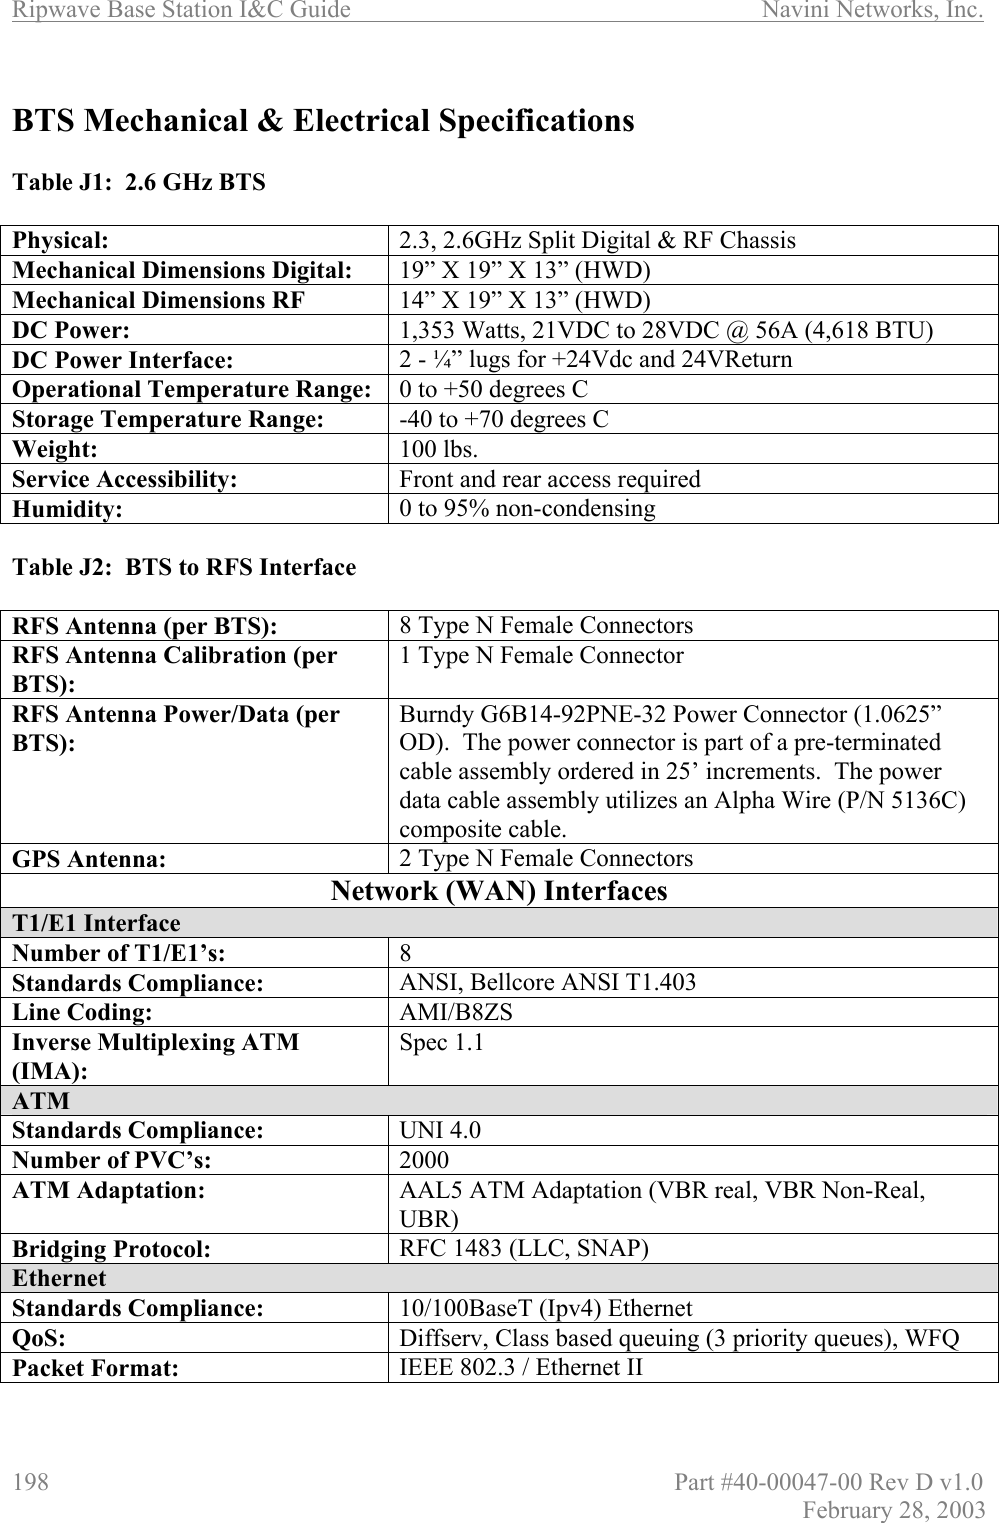 Ripwave Base Station I&amp;C Guide                      Navini Networks, Inc. 198                          Part #40-00047-00 Rev D v1.0 February 28, 2003  BTS Mechanical &amp; Electrical Specifications  Table J1:  2.6 GHz BTS  Physical:  2.3, 2.6GHz Split Digital &amp; RF Chassis Mechanical Dimensions Digital:  19” X 19” X 13” (HWD) Mechanical Dimensions RF  14” X 19” X 13” (HWD) DC Power:  1,353 Watts, 21VDC to 28VDC @ 56A (4,618 BTU) DC Power Interface:  2 - ¼” lugs for +24Vdc and 24VReturn Operational Temperature Range:  0 to +50 degrees C Storage Temperature Range:  -40 to +70 degrees C Weight:  100 lbs. Service Accessibility:  Front and rear access required Humidity:  0 to 95% non-condensing  Table J2:  BTS to RFS Interface  RFS Antenna (per BTS):  8 Type N Female Connectors RFS Antenna Calibration (per BTS): 1 Type N Female Connector RFS Antenna Power/Data (per BTS): Burndy G6B14-92PNE-32 Power Connector (1.0625” OD).  The power connector is part of a pre-terminated cable assembly ordered in 25’ increments.  The power data cable assembly utilizes an Alpha Wire (P/N 5136C) composite cable. GPS Antenna:  2 Type N Female Connectors Network (WAN) Interfaces T1/E1 Interface Number of T1/E1’s:  8 Standards Compliance:  ANSI, Bellcore ANSI T1.403 Line Coding:  AMI/B8ZS Inverse Multiplexing ATM (IMA): Spec 1.1 ATM Standards Compliance:  UNI 4.0 Number of PVC’s:  2000 ATM Adaptation:  AAL5 ATM Adaptation (VBR real, VBR Non-Real, UBR) Bridging Protocol:  RFC 1483 (LLC, SNAP) Ethernet Standards Compliance:  10/100BaseT (Ipv4) Ethernet QoS:  Diffserv, Class based queuing (3 priority queues), WFQ Packet Format:  IEEE 802.3 / Ethernet II  